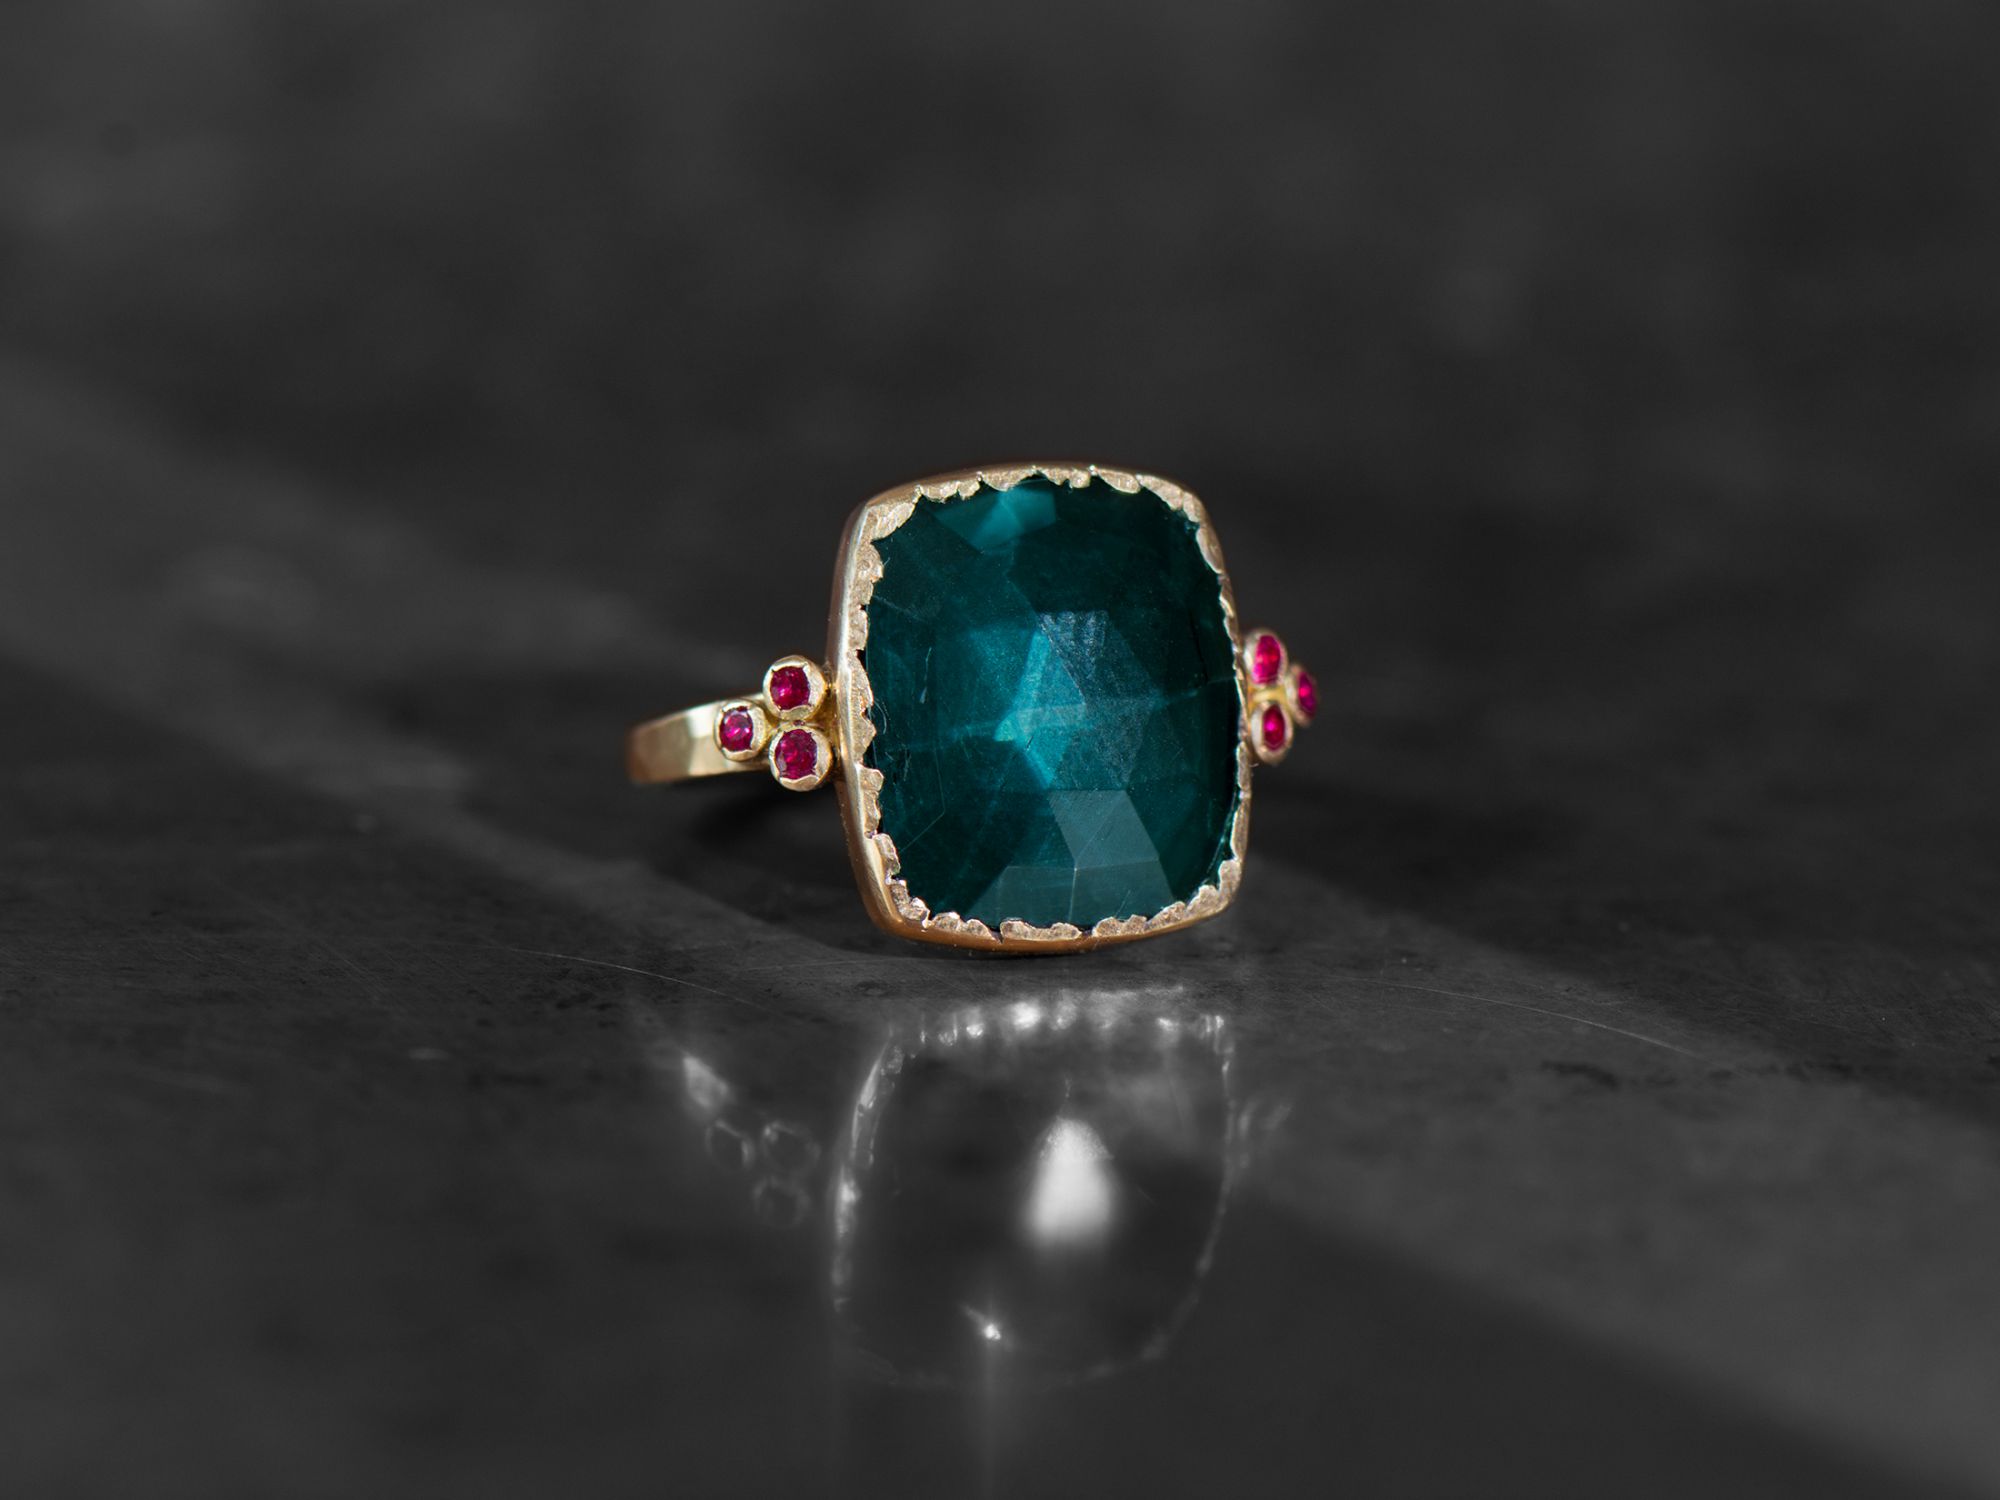 Queen Rubies and 5,78 cts petrol blue tourmaline ring by Emmanuelle Zysman